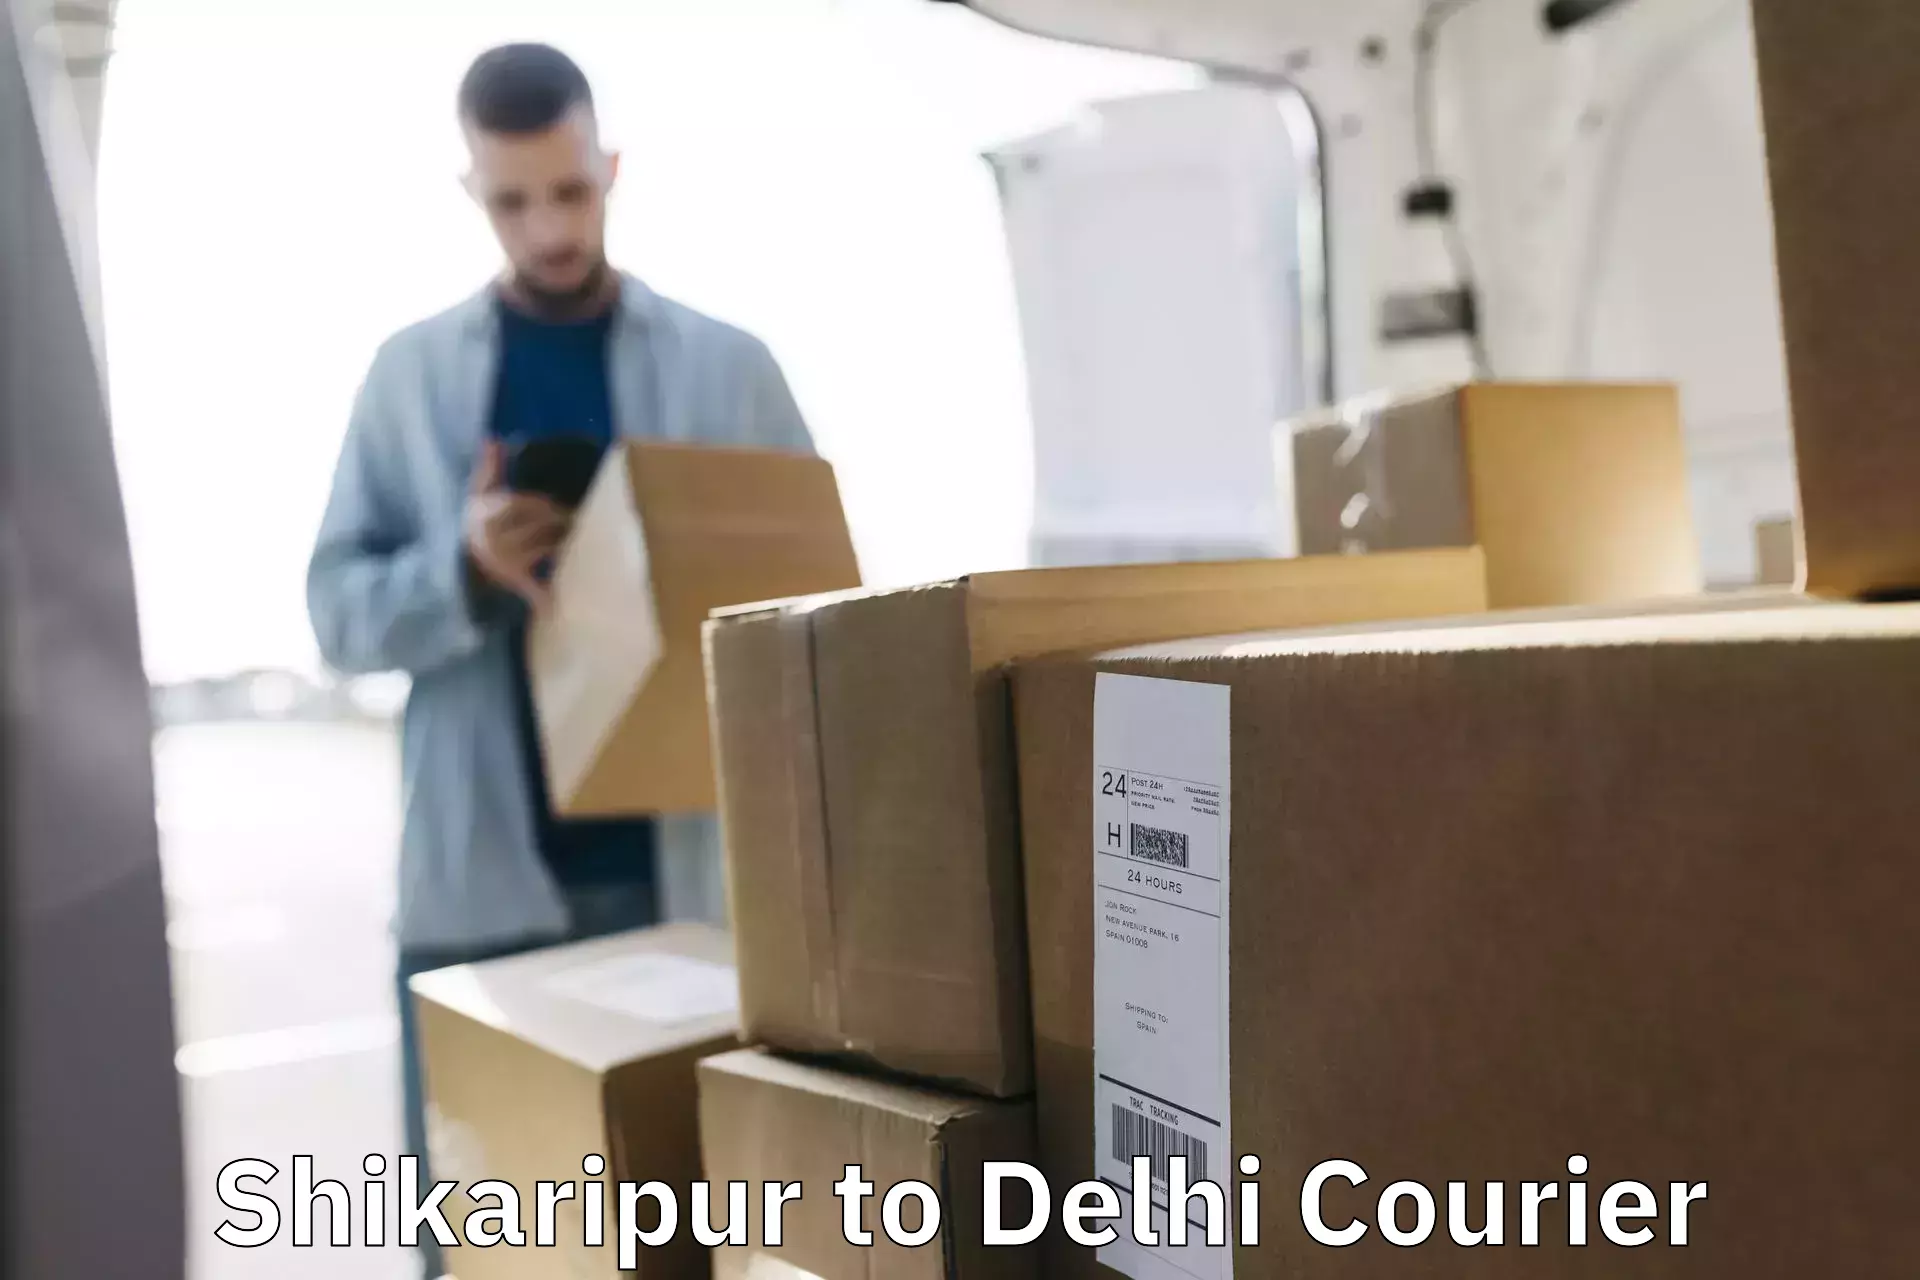 Reliable delivery network Shikaripur to IIT Delhi